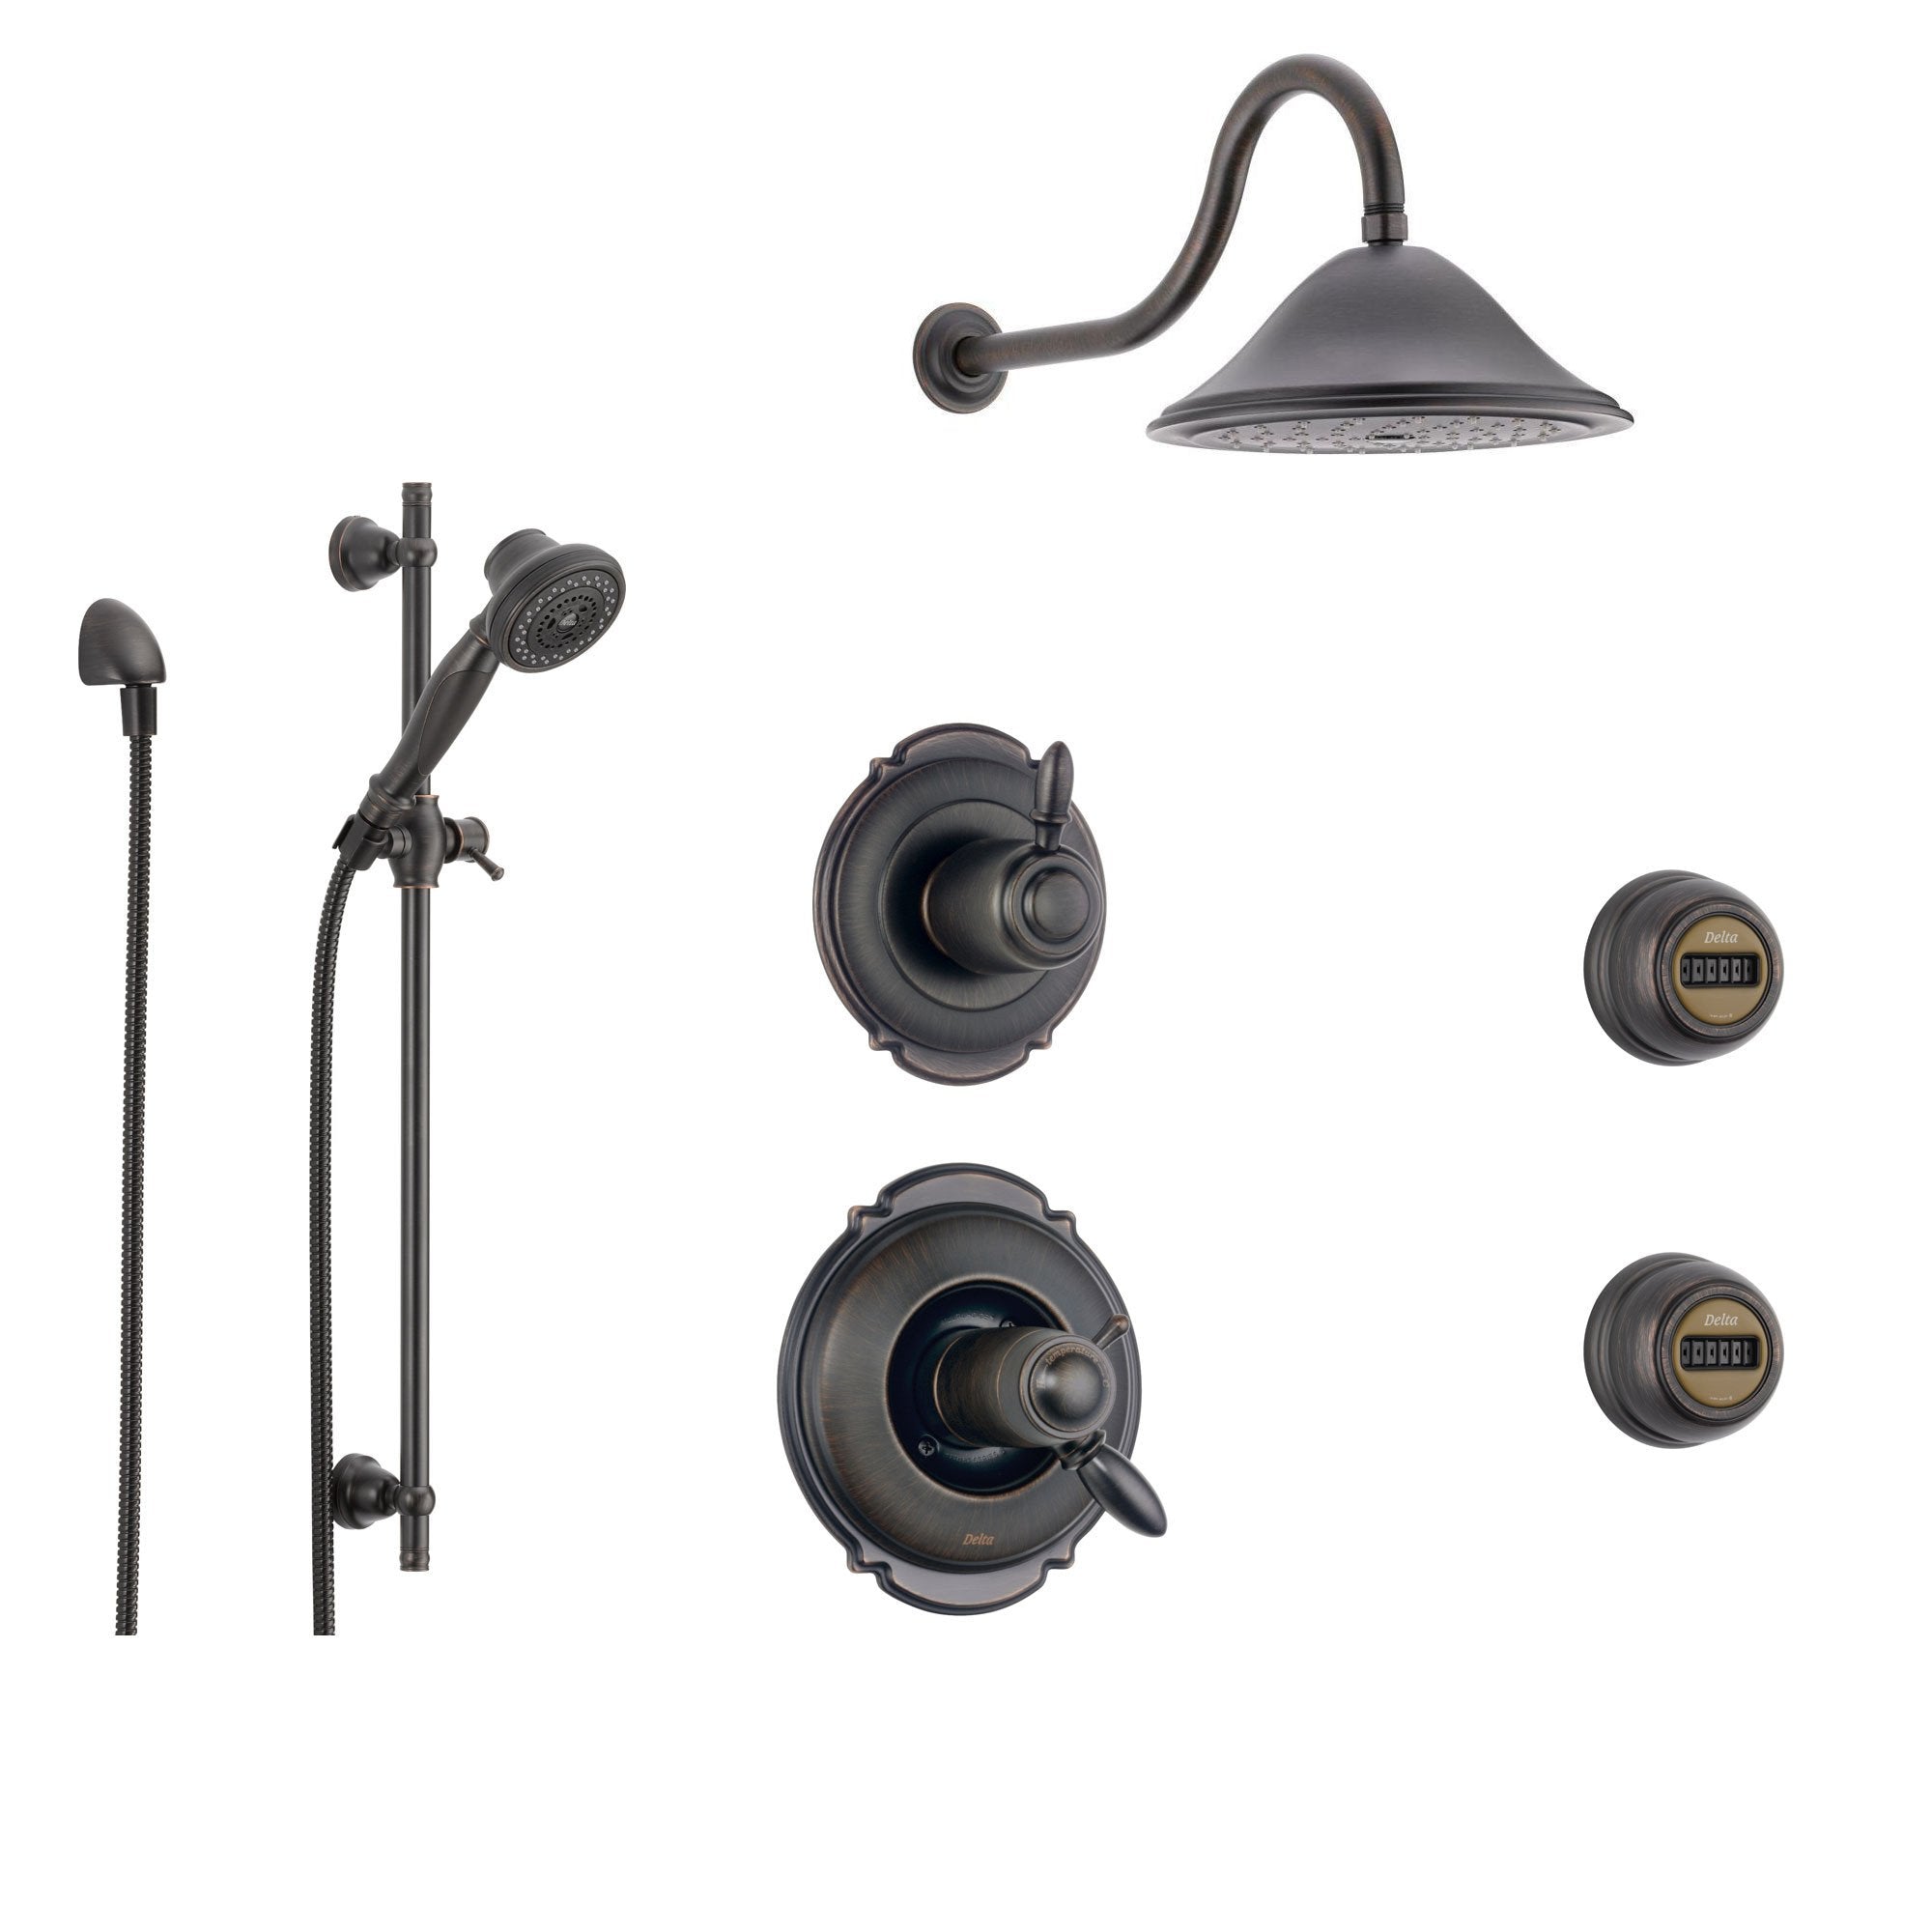 Delta Victorian Venetian Bronze Shower System with Thermostatic Shower Handle, 6-setting Diverter, Large Rain Showerhead, Handheld Shower, and 2 Body Sprays SS17T5592RB